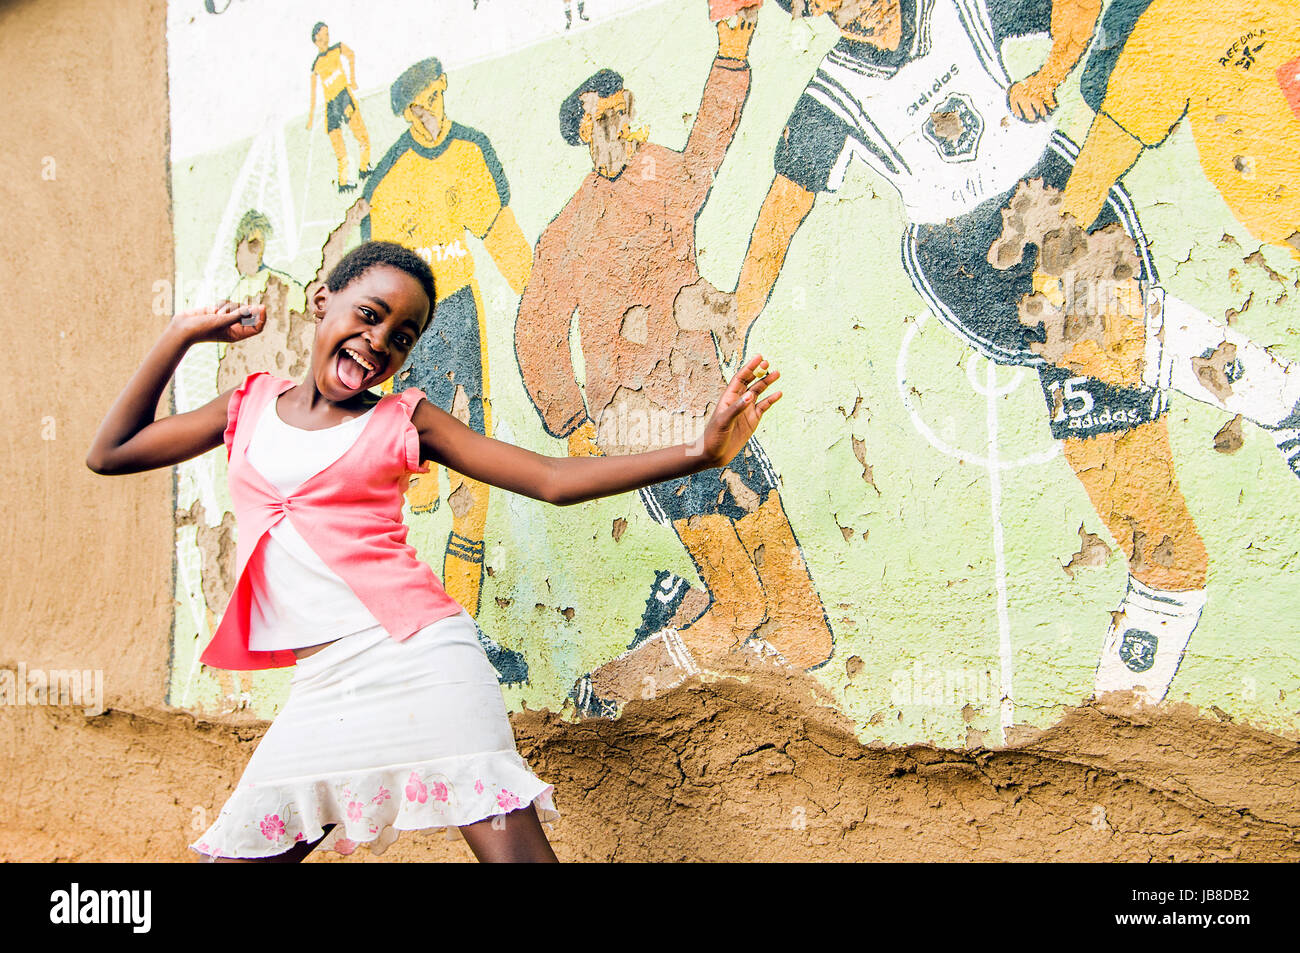 Girl in front of football street art, Olifants River, South Africa Stock Photo